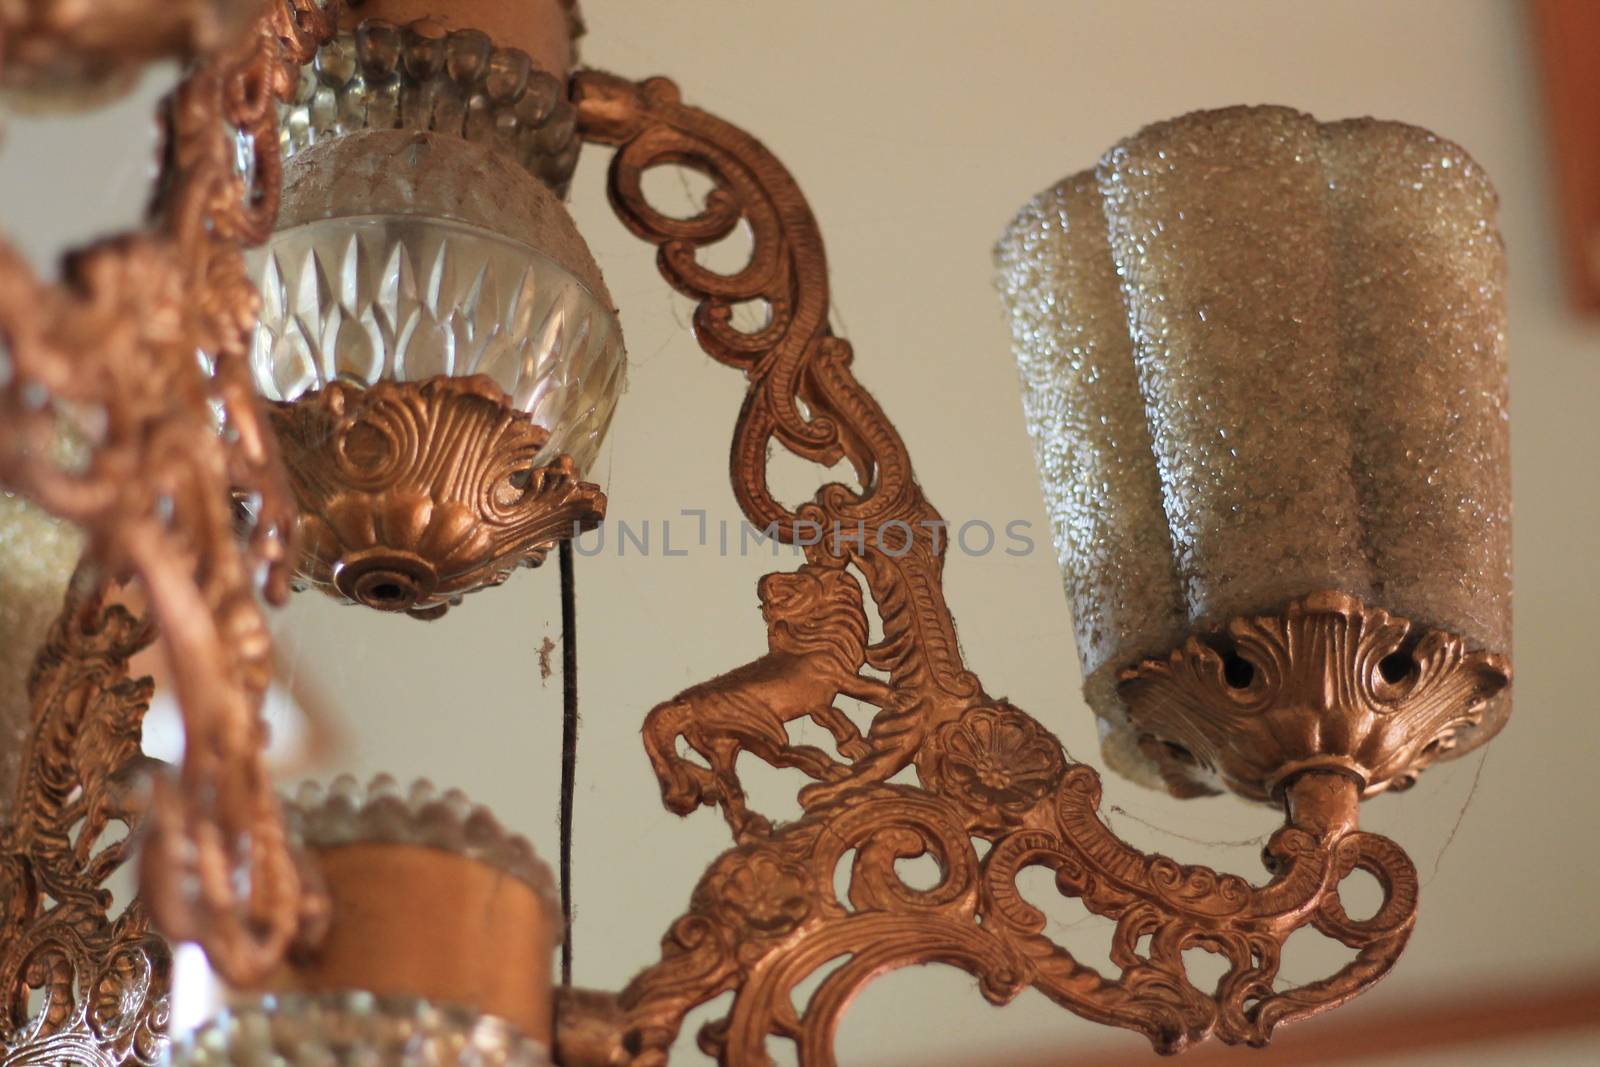 ancient decorative lamps design made of copper by imagifa